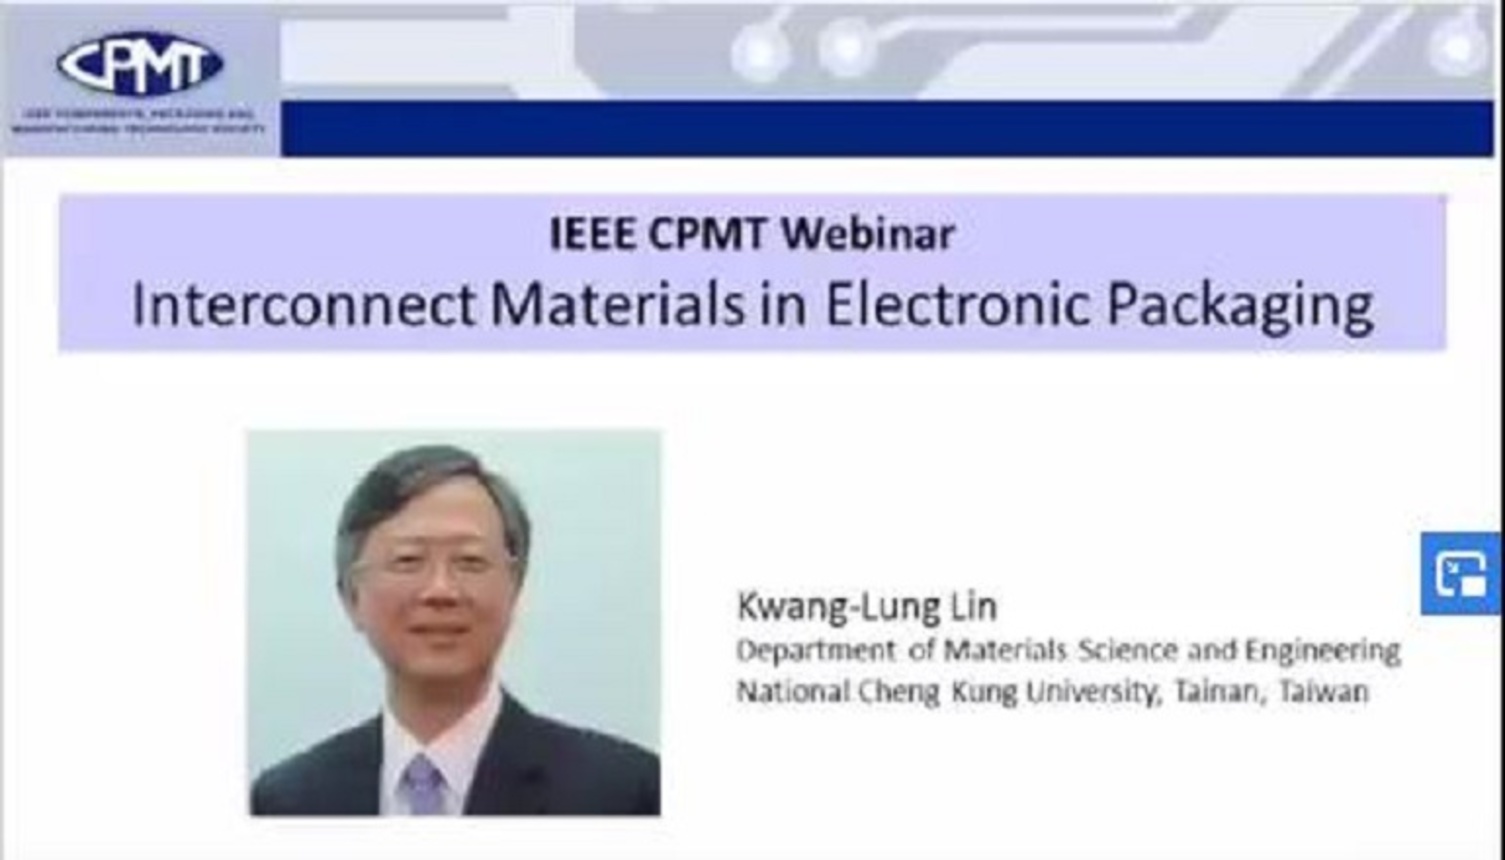 Interconnect Materials in Electronic Packaging